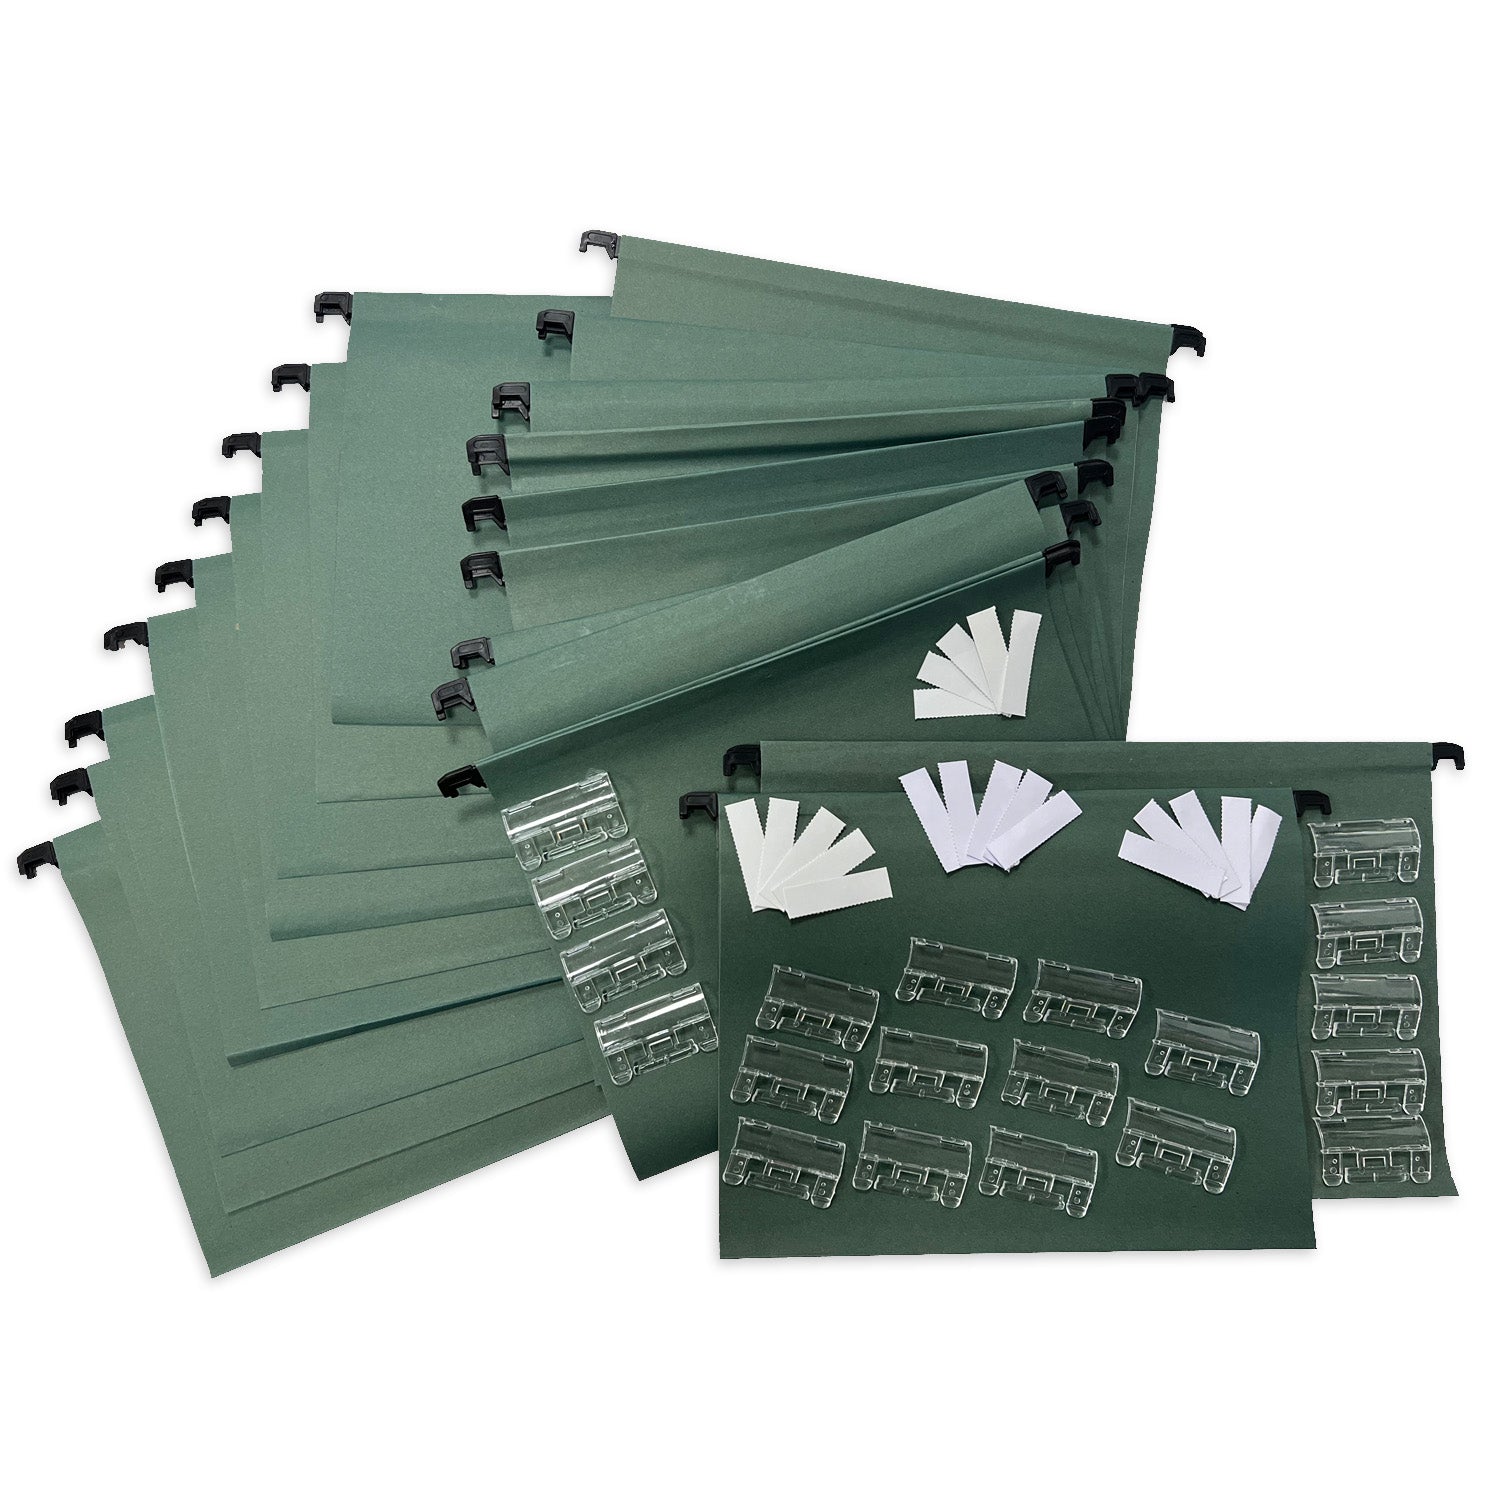 Array of 20 A4+ (Foolscap) green manilla suspension files fanned out with white paper inserts on top, accompanied by clear plastic tabs, ready for organization in a filing cabinet.